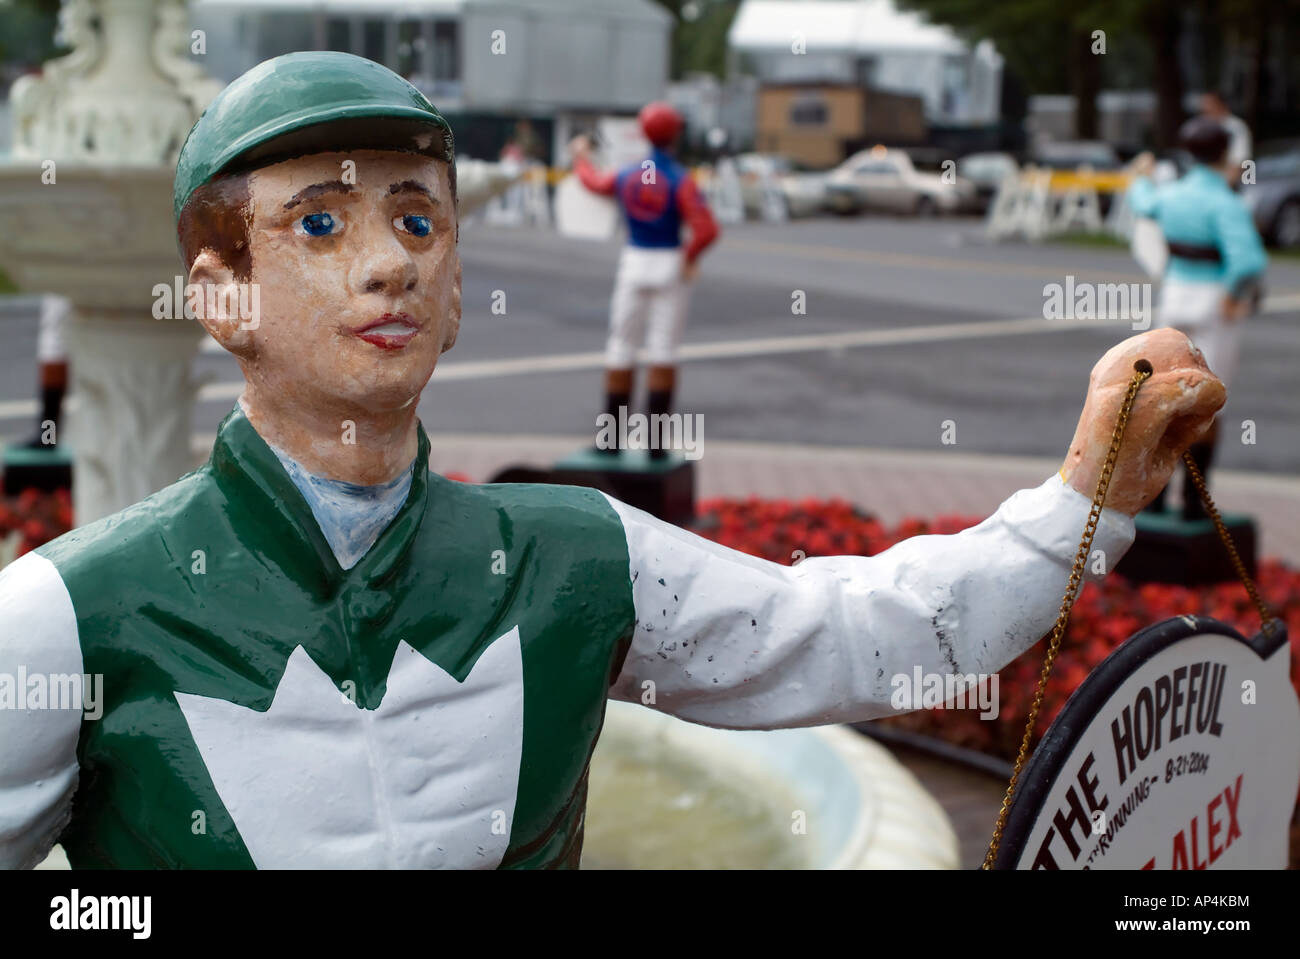 One of a circle of Lawn Jockeys in Saratoga Stock Photo